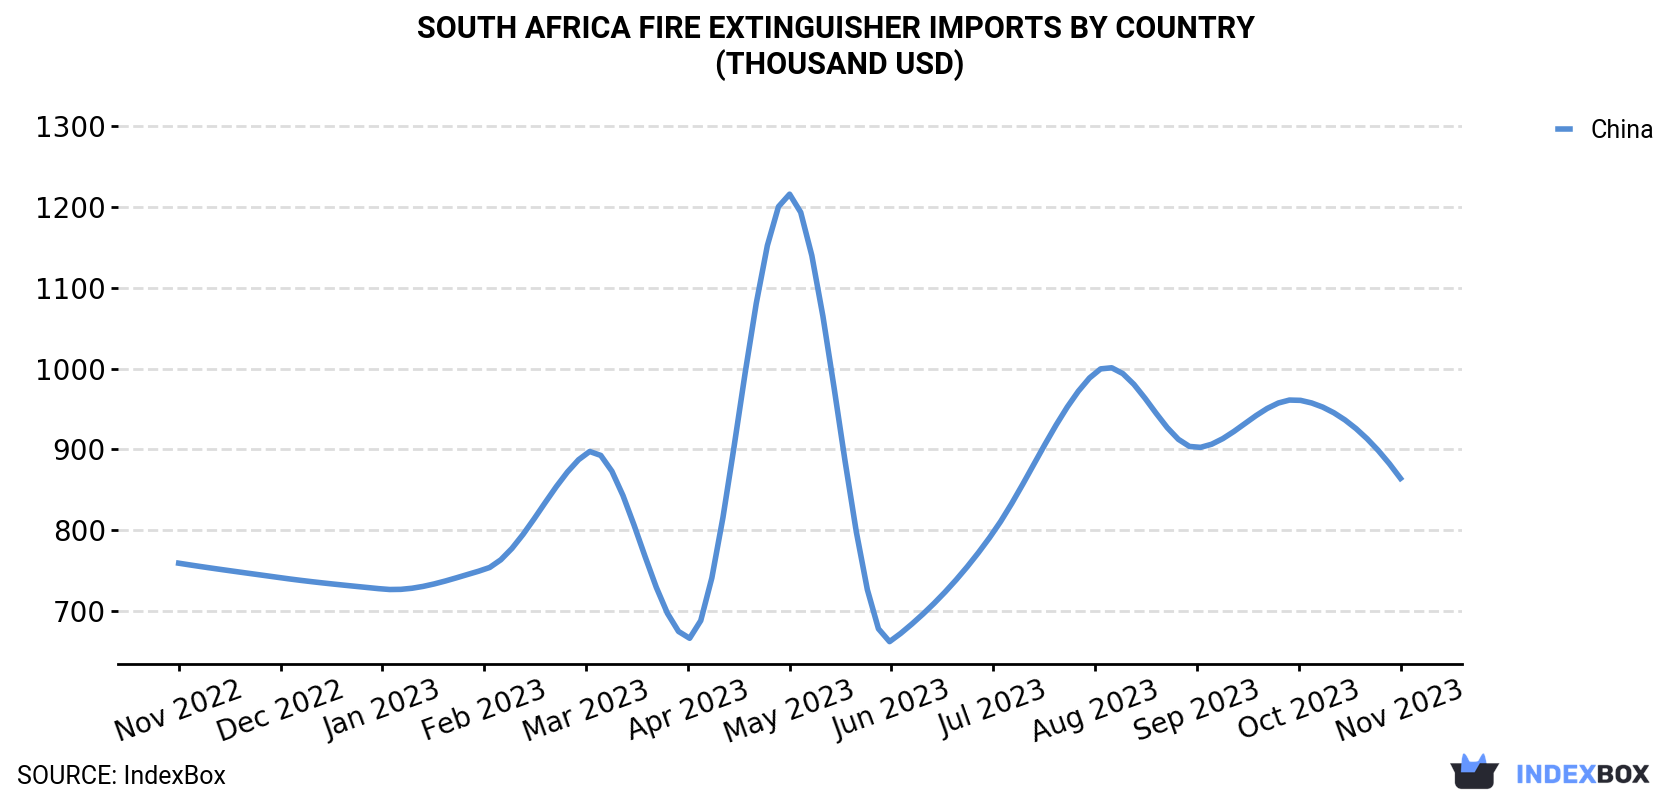 South Africa Fire Extinguisher Imports By Country (Thousand USD)